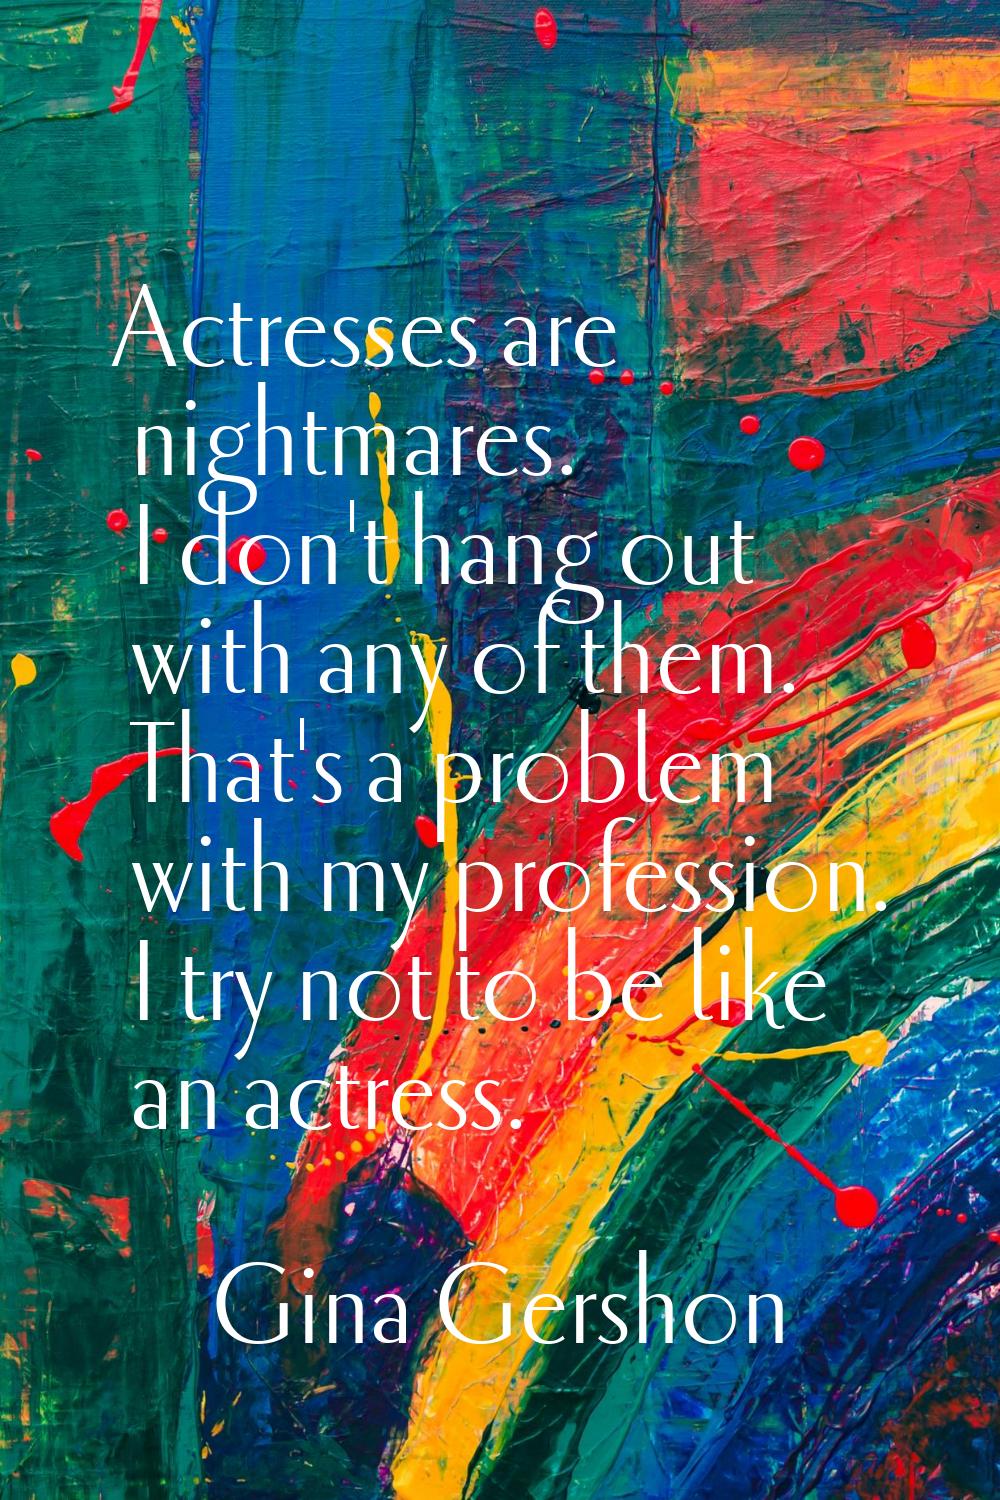 Actresses are nightmares. I don't hang out with any of them. That's a problem with my profession. I